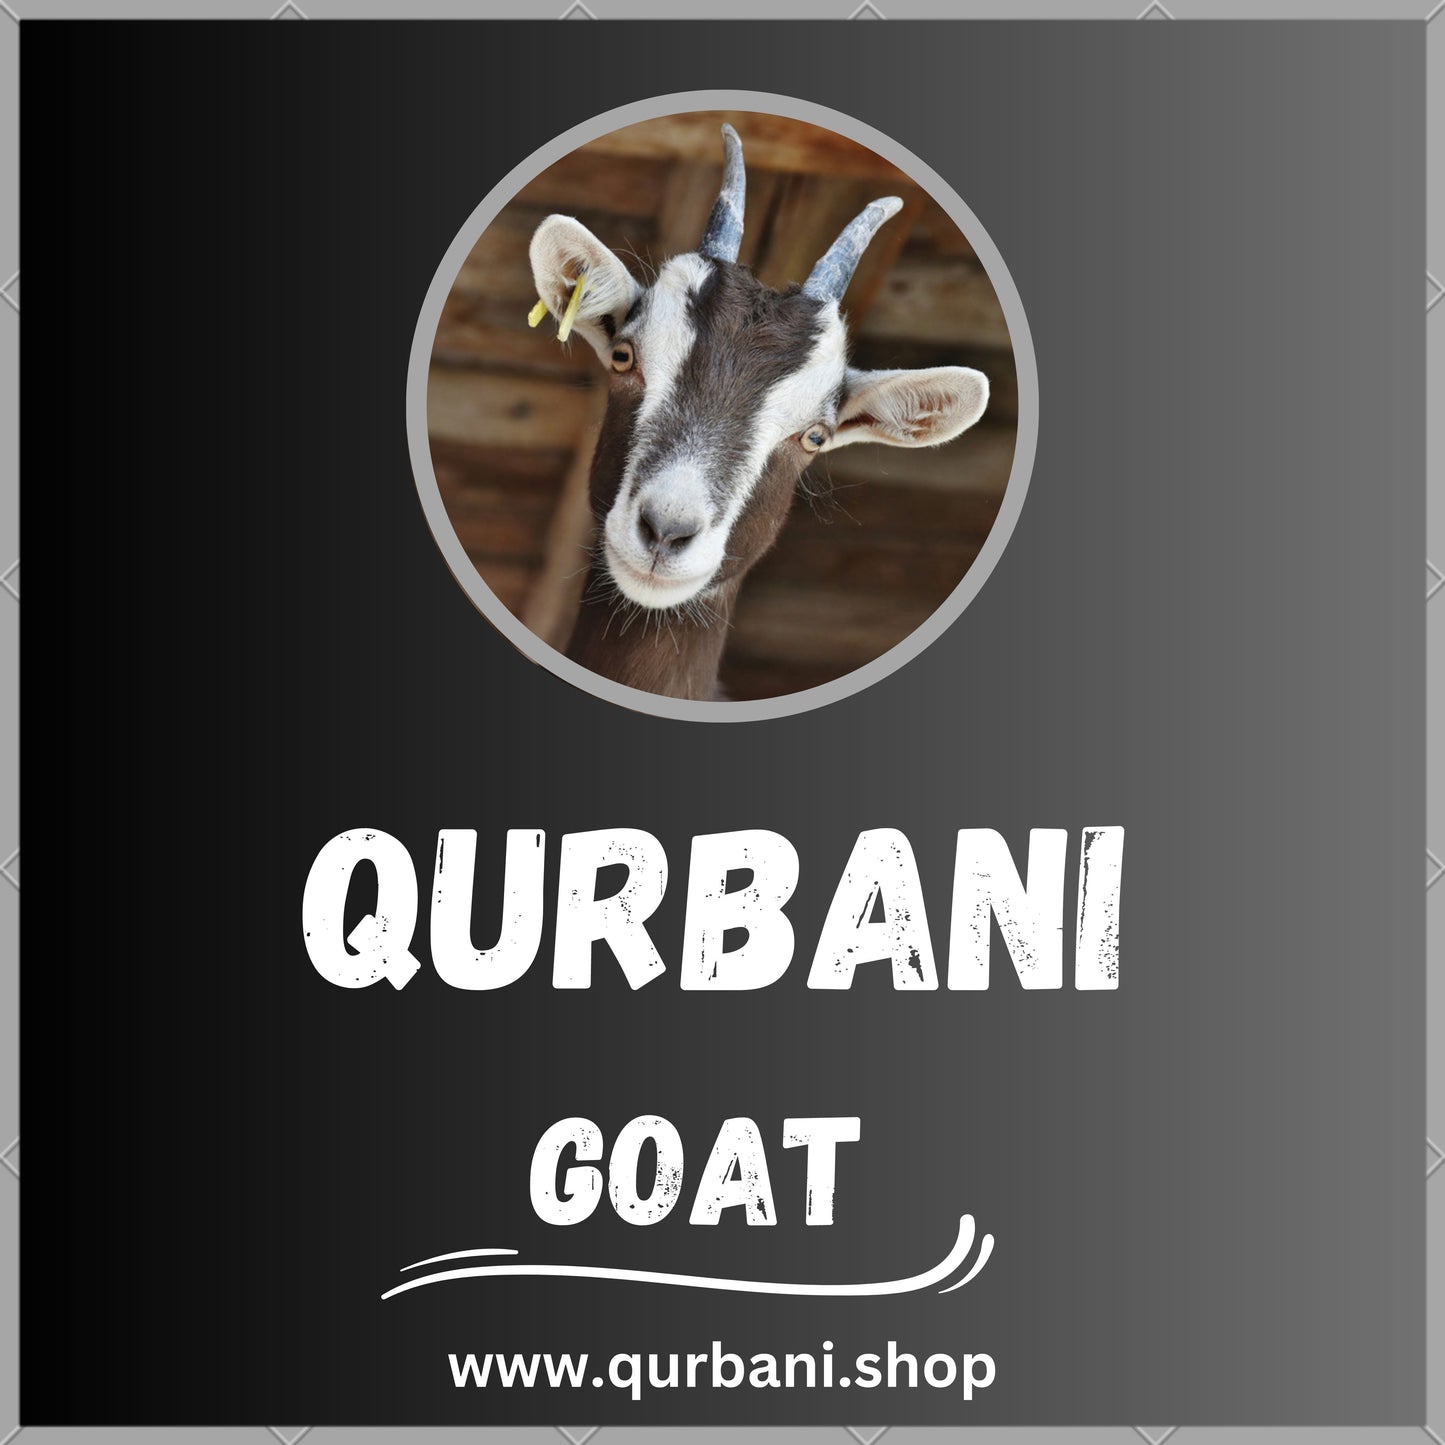 Celebrate Eid al-Adha with Qurbani in Glendale - Book Now for High-Quality